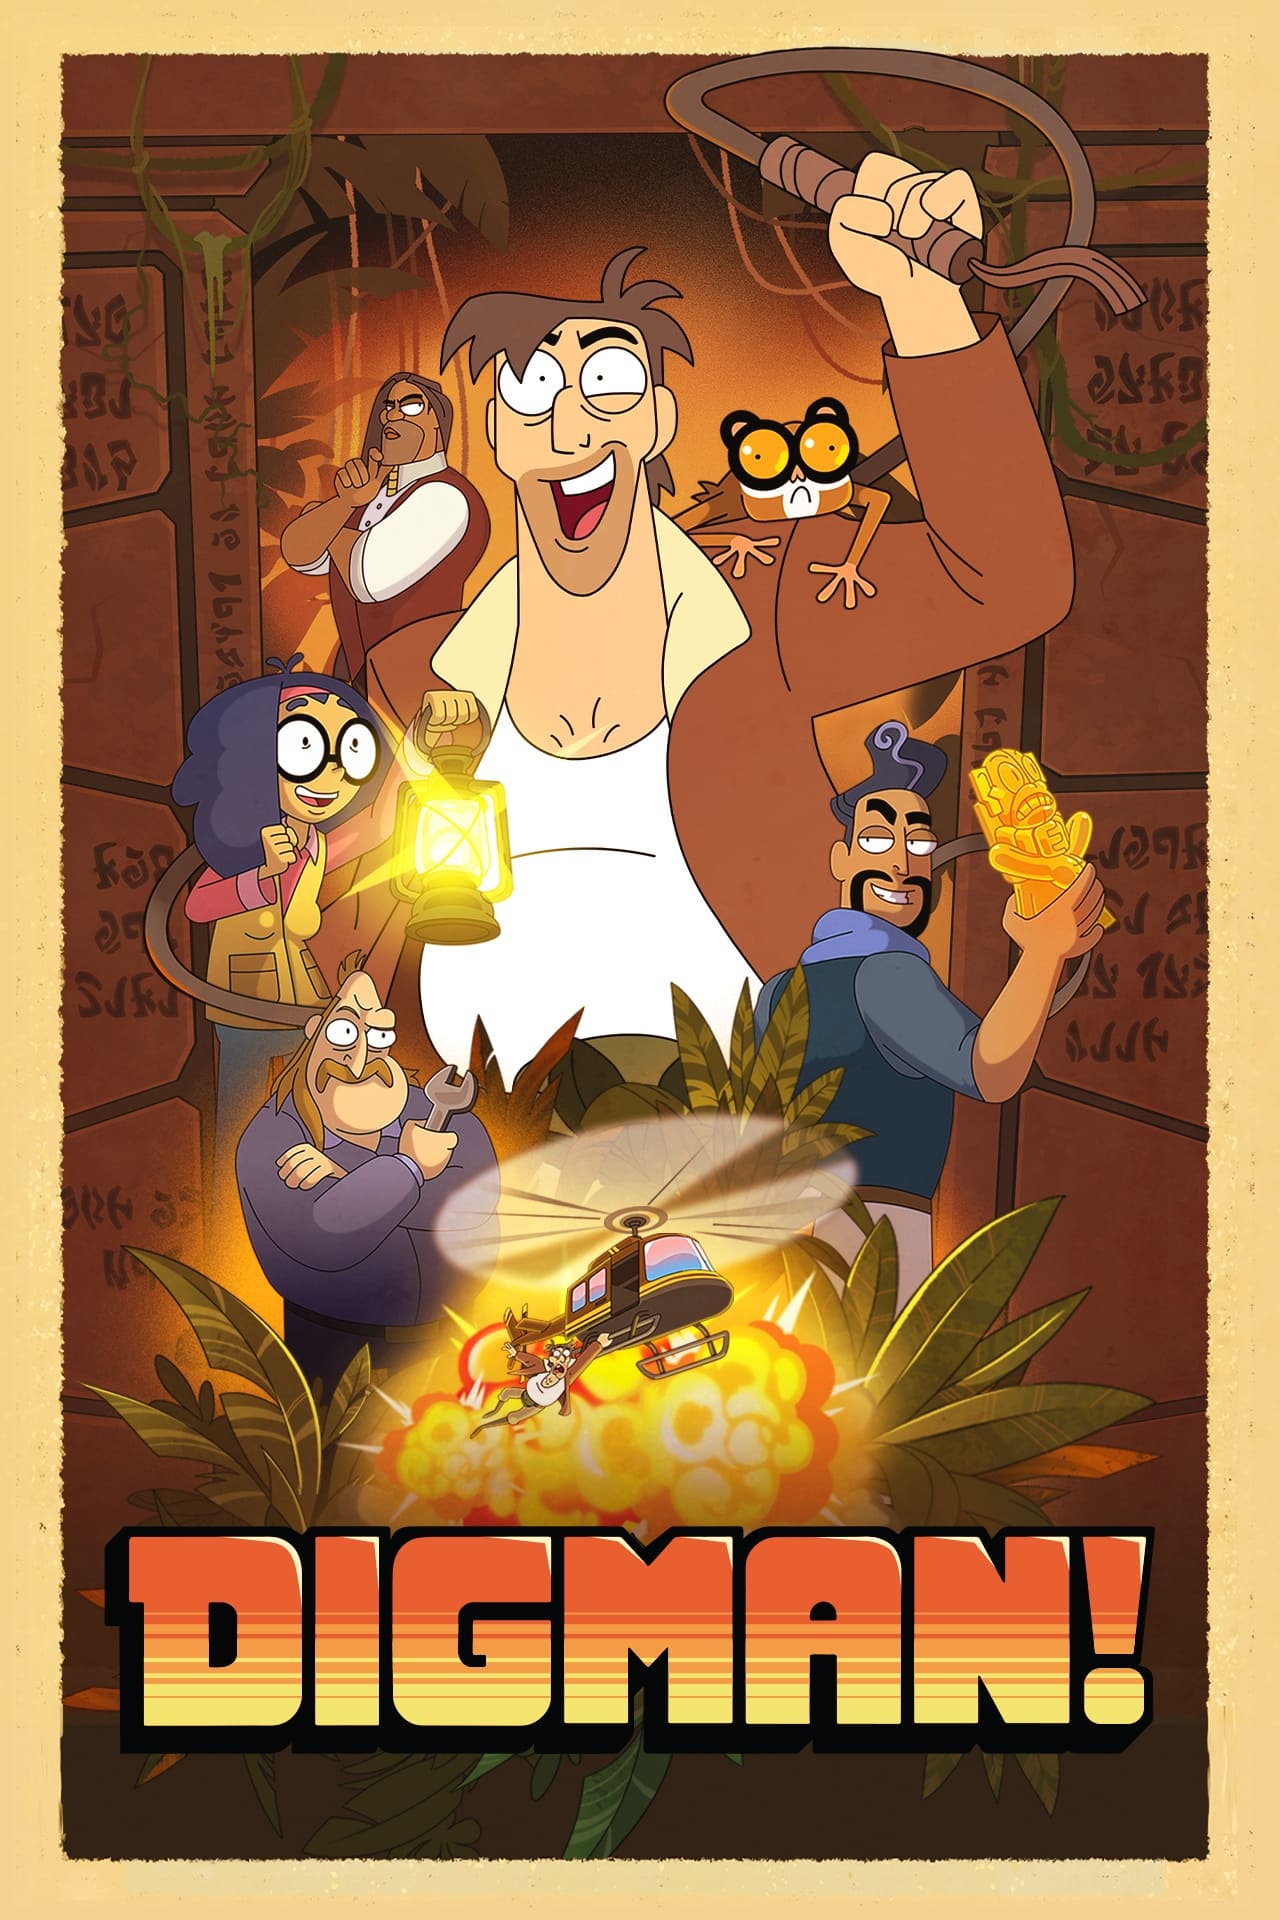 Digman! TV Shows About Adult Animation